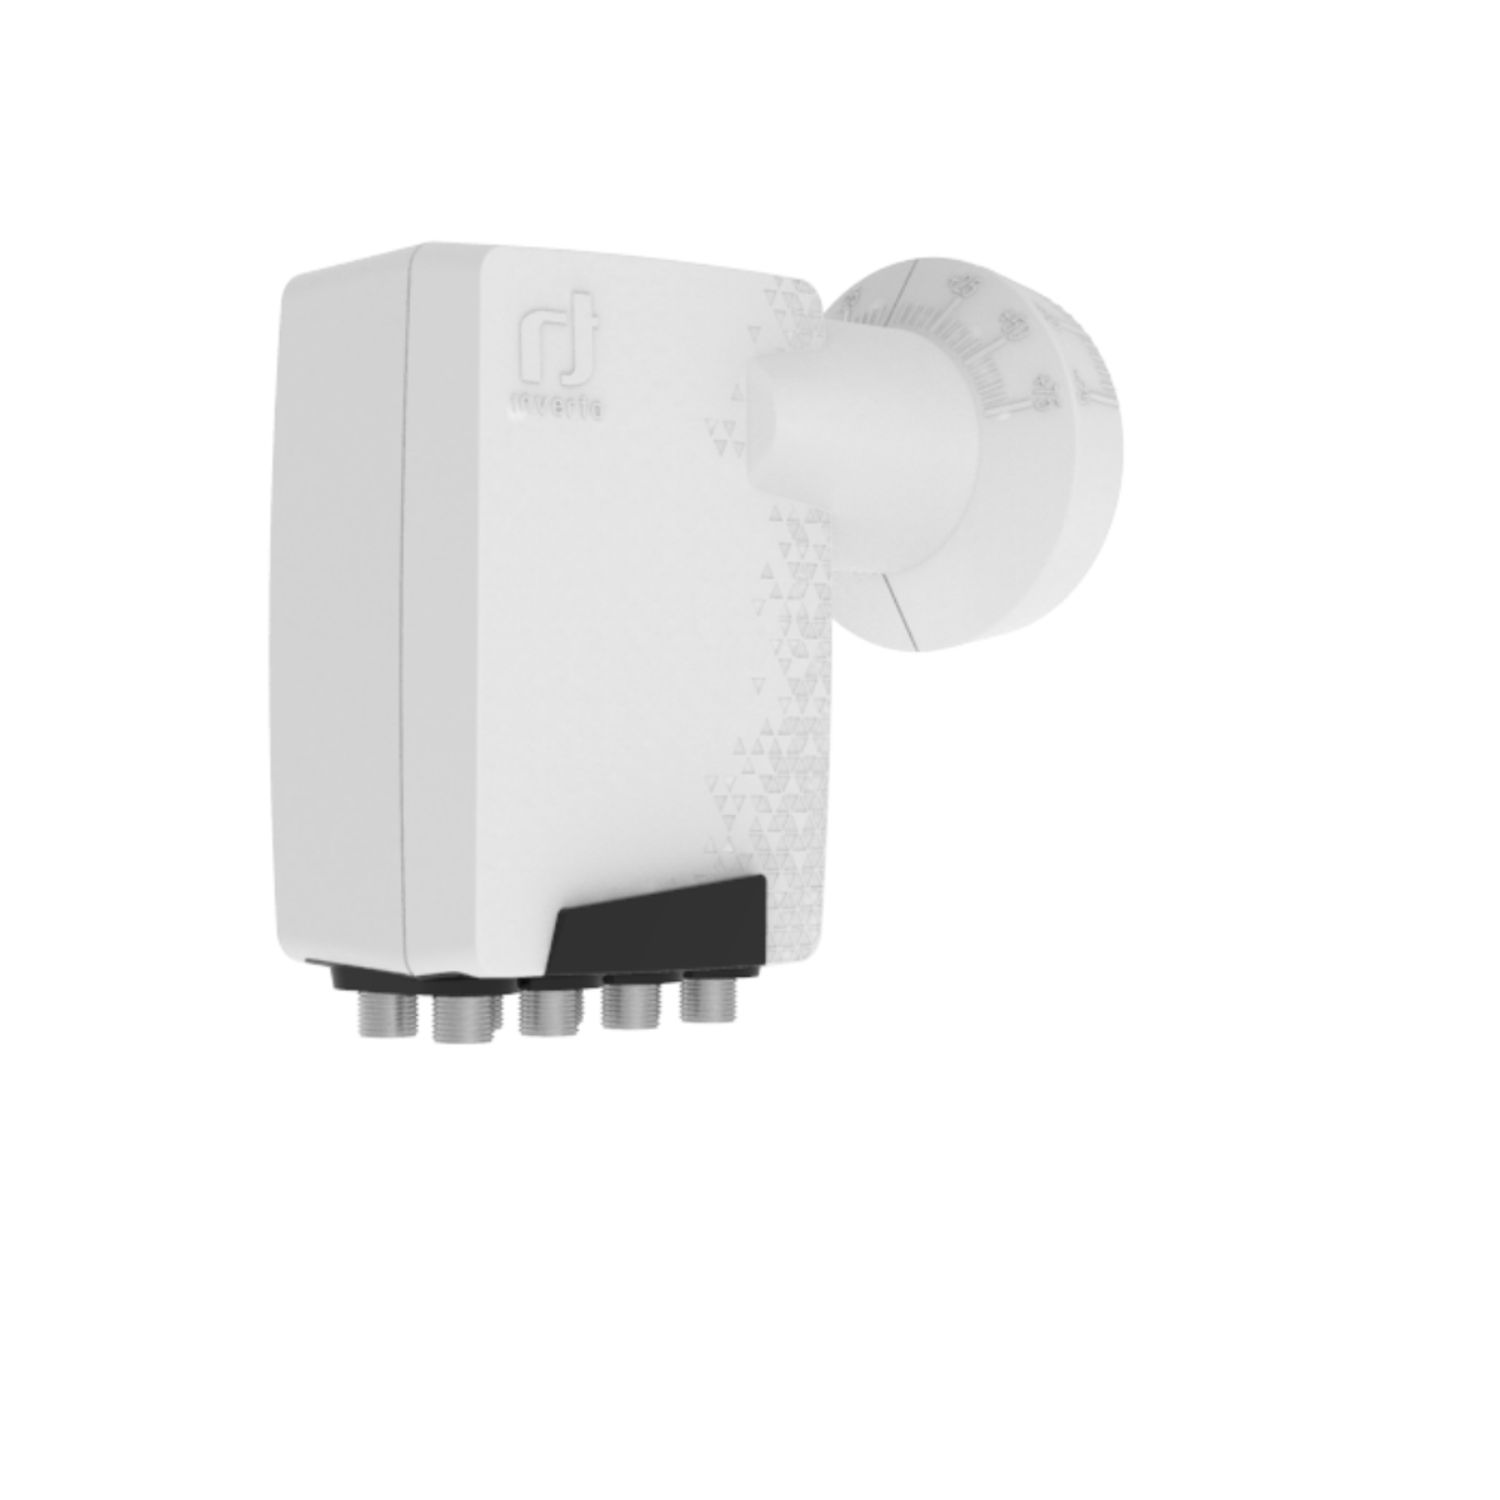 Output Home 40mm Pro INVERTO Octo PLL Universal LNB